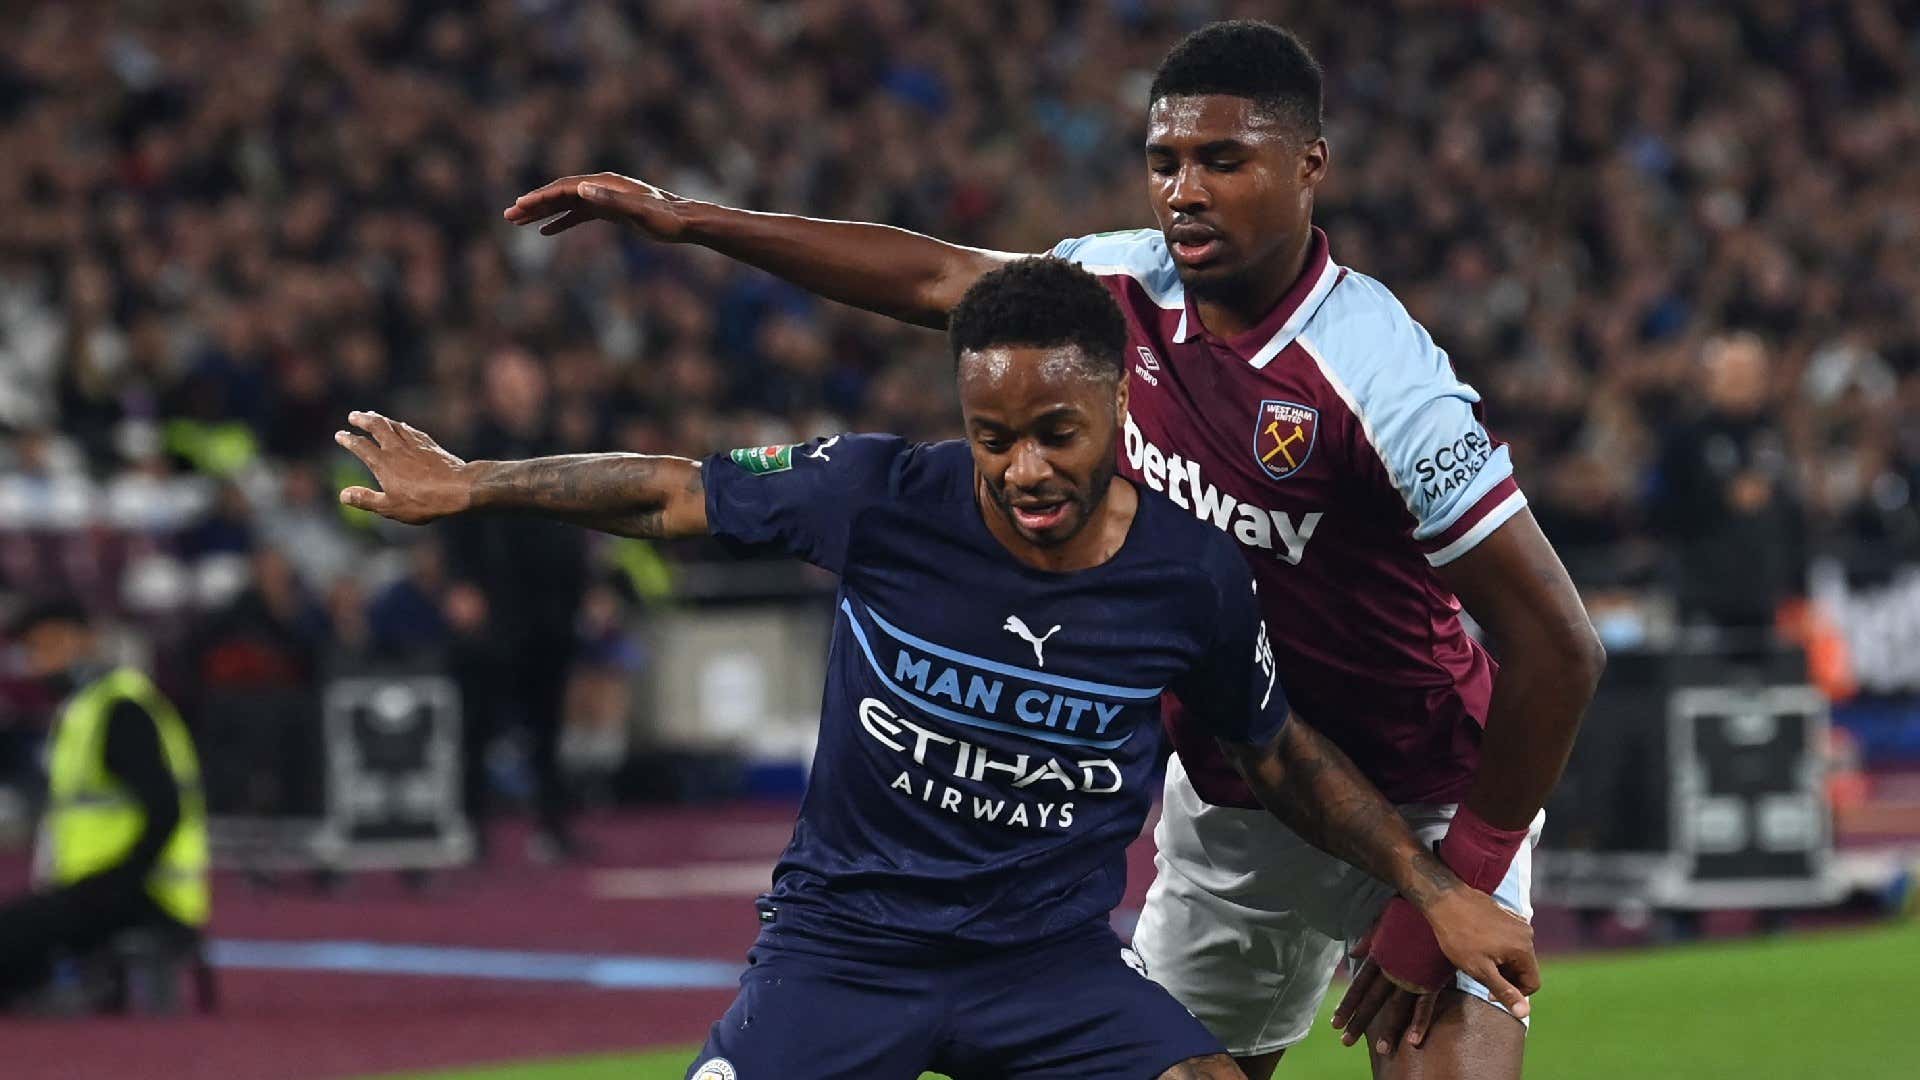 Photo of West Ham United v Manchester City Live Commentary & Result, 10/27/21, League Cup | Goal.com